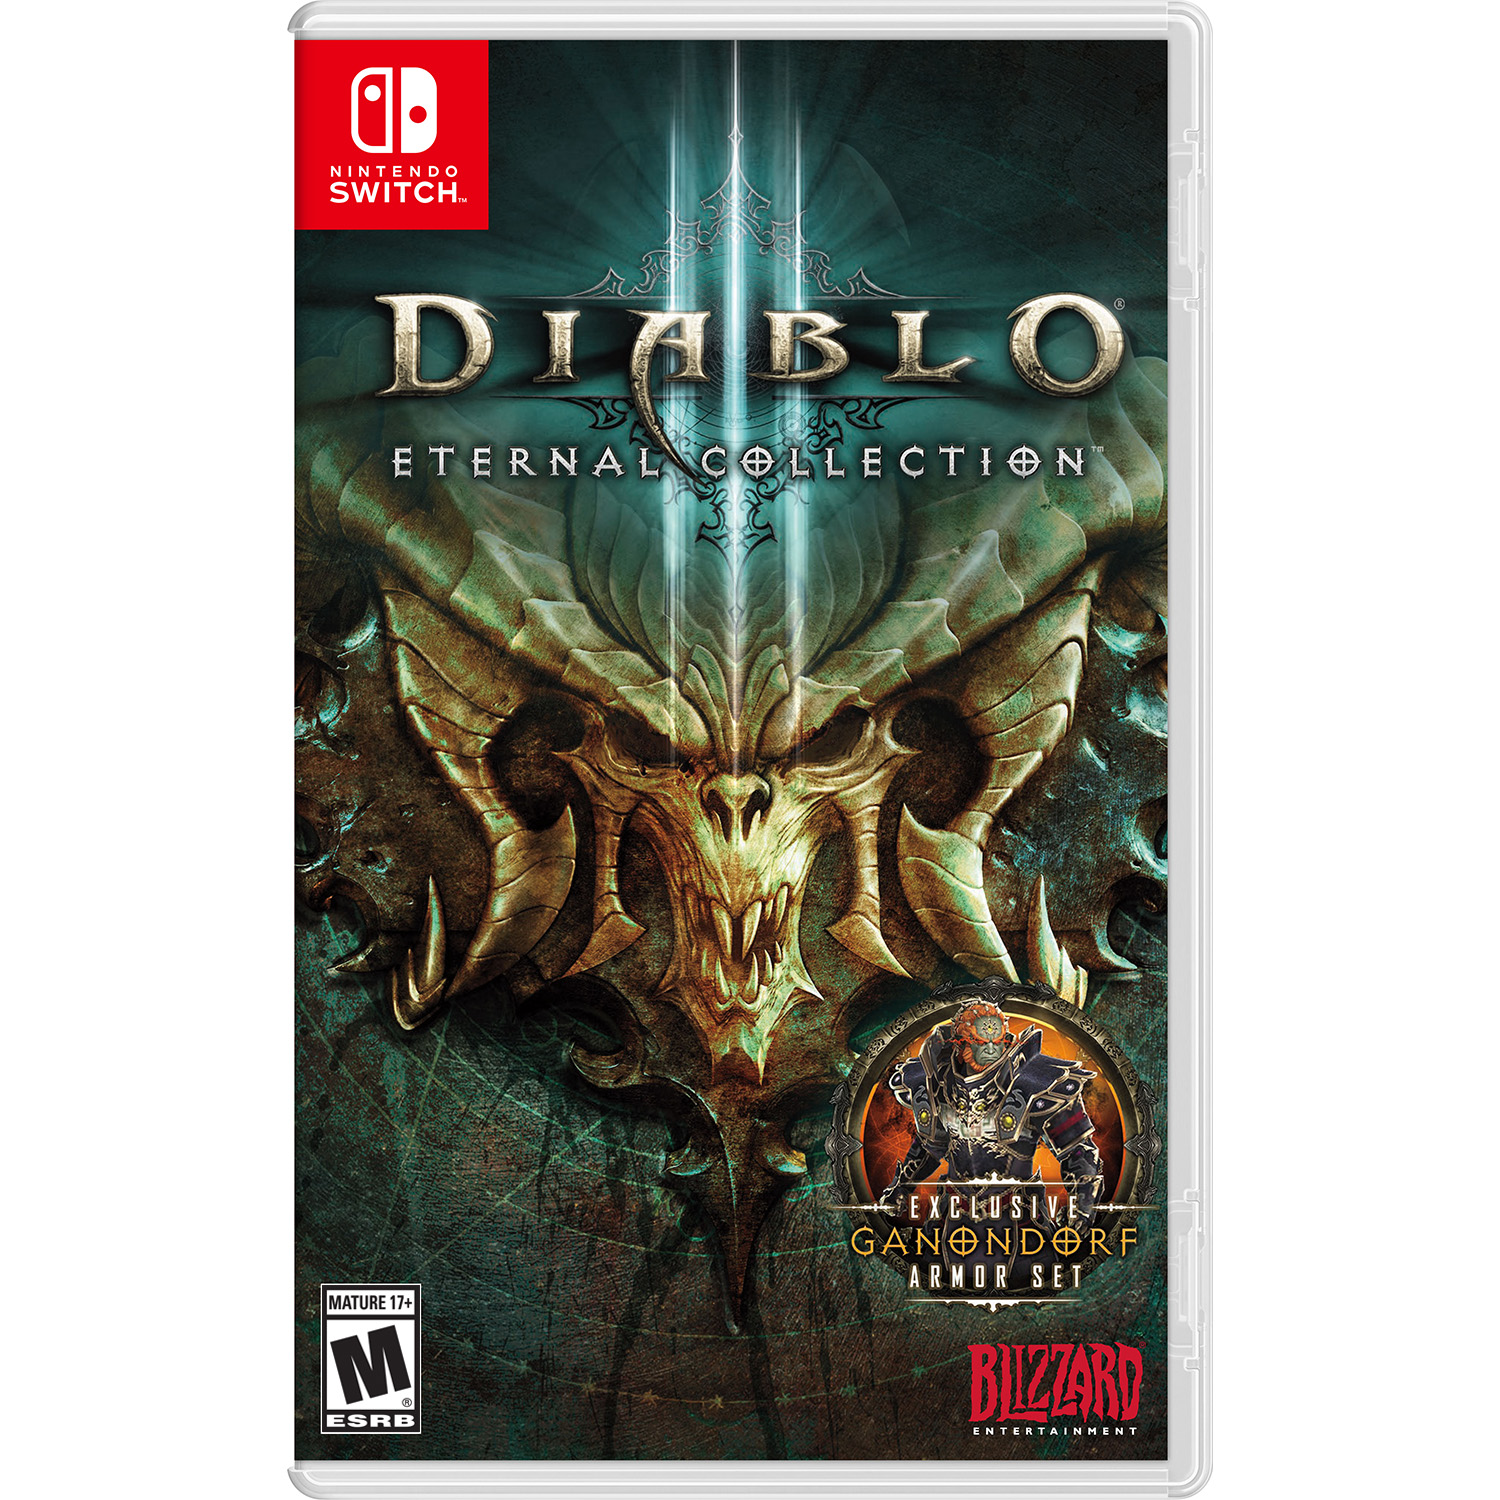 Diablo III Eternal Collection, Blizzard Entertainment, Nintendo Switch, [Physical], 88343 - image 1 of 6